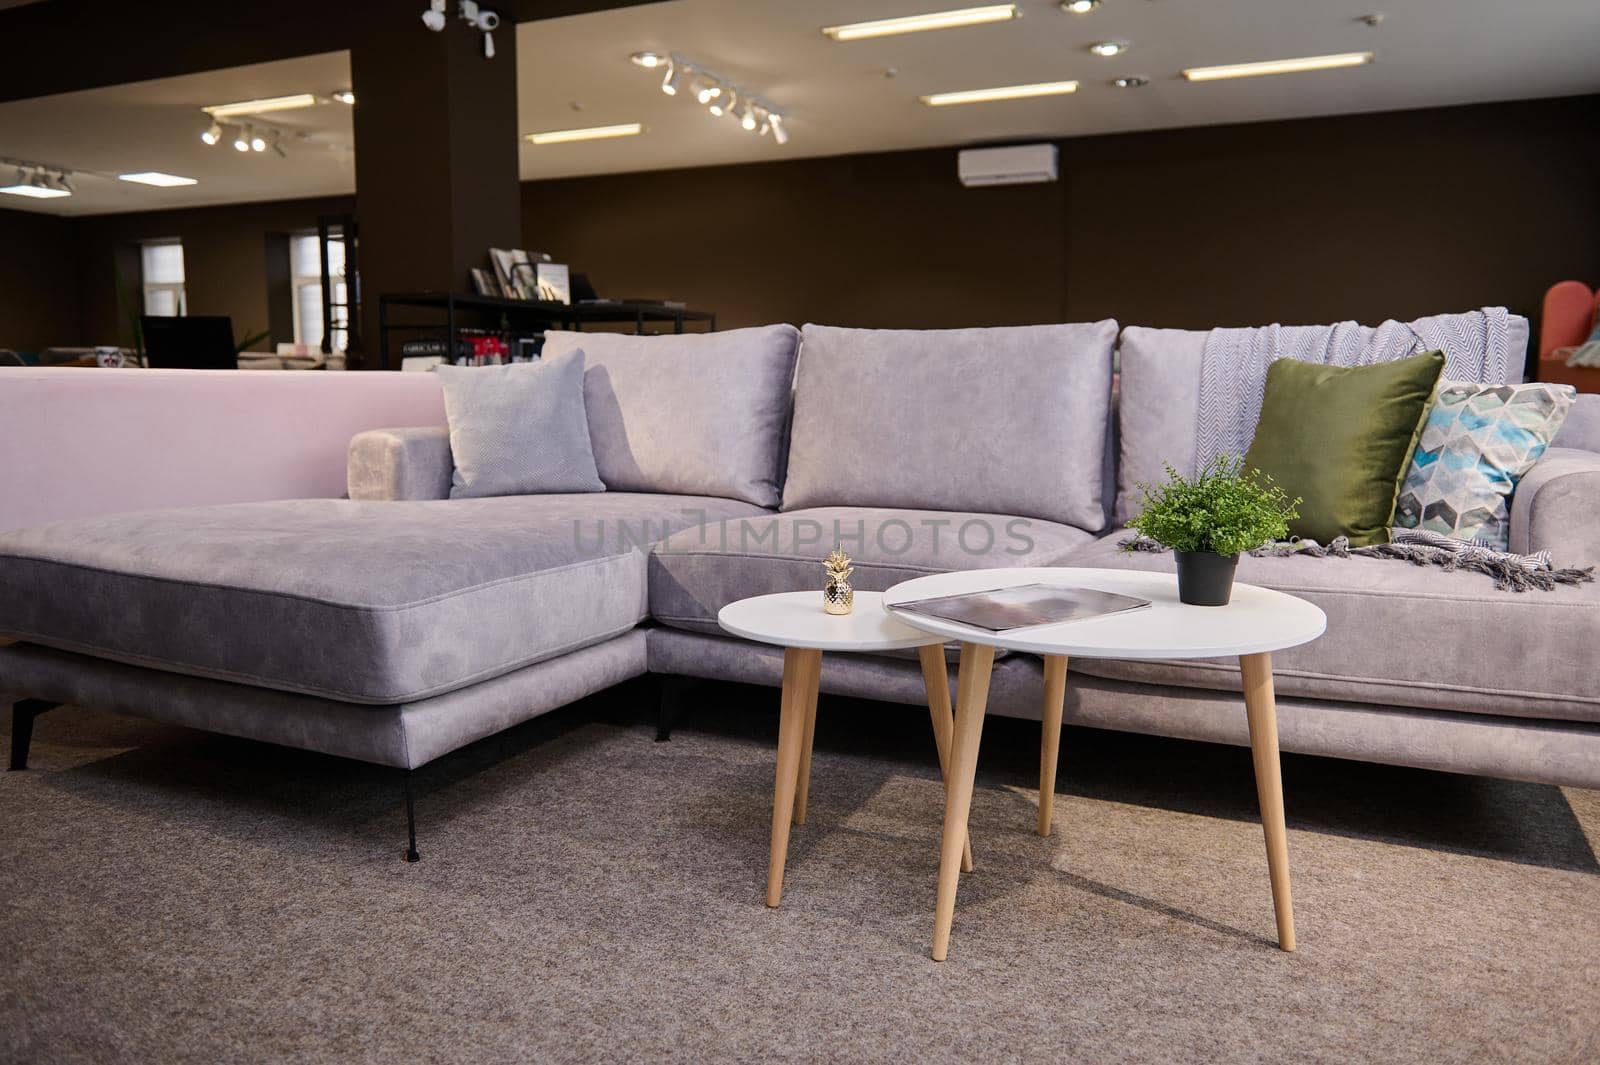 Exhibition of upholstered furniture. Comfortable upholstered settee with colored stylish cushions and small modern journal table displayed for sale in the furniture store showroom.